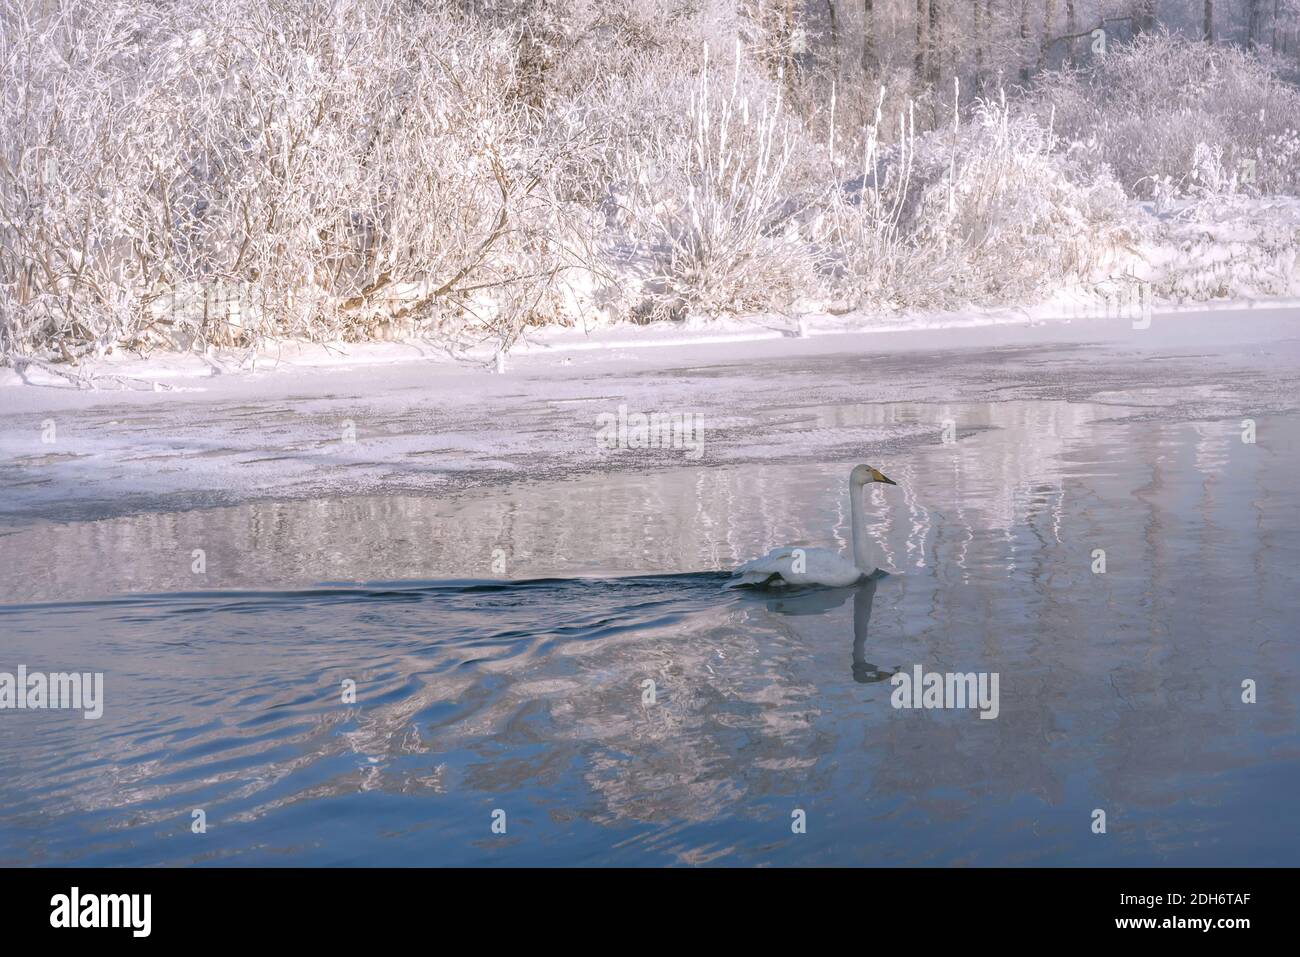 Amazing winter landscape with swan (Cygnus cygnus) swimming in the lake, snow and ice against the blue sky and white trees in hoarfrost. Altai, Russia Stock Photo